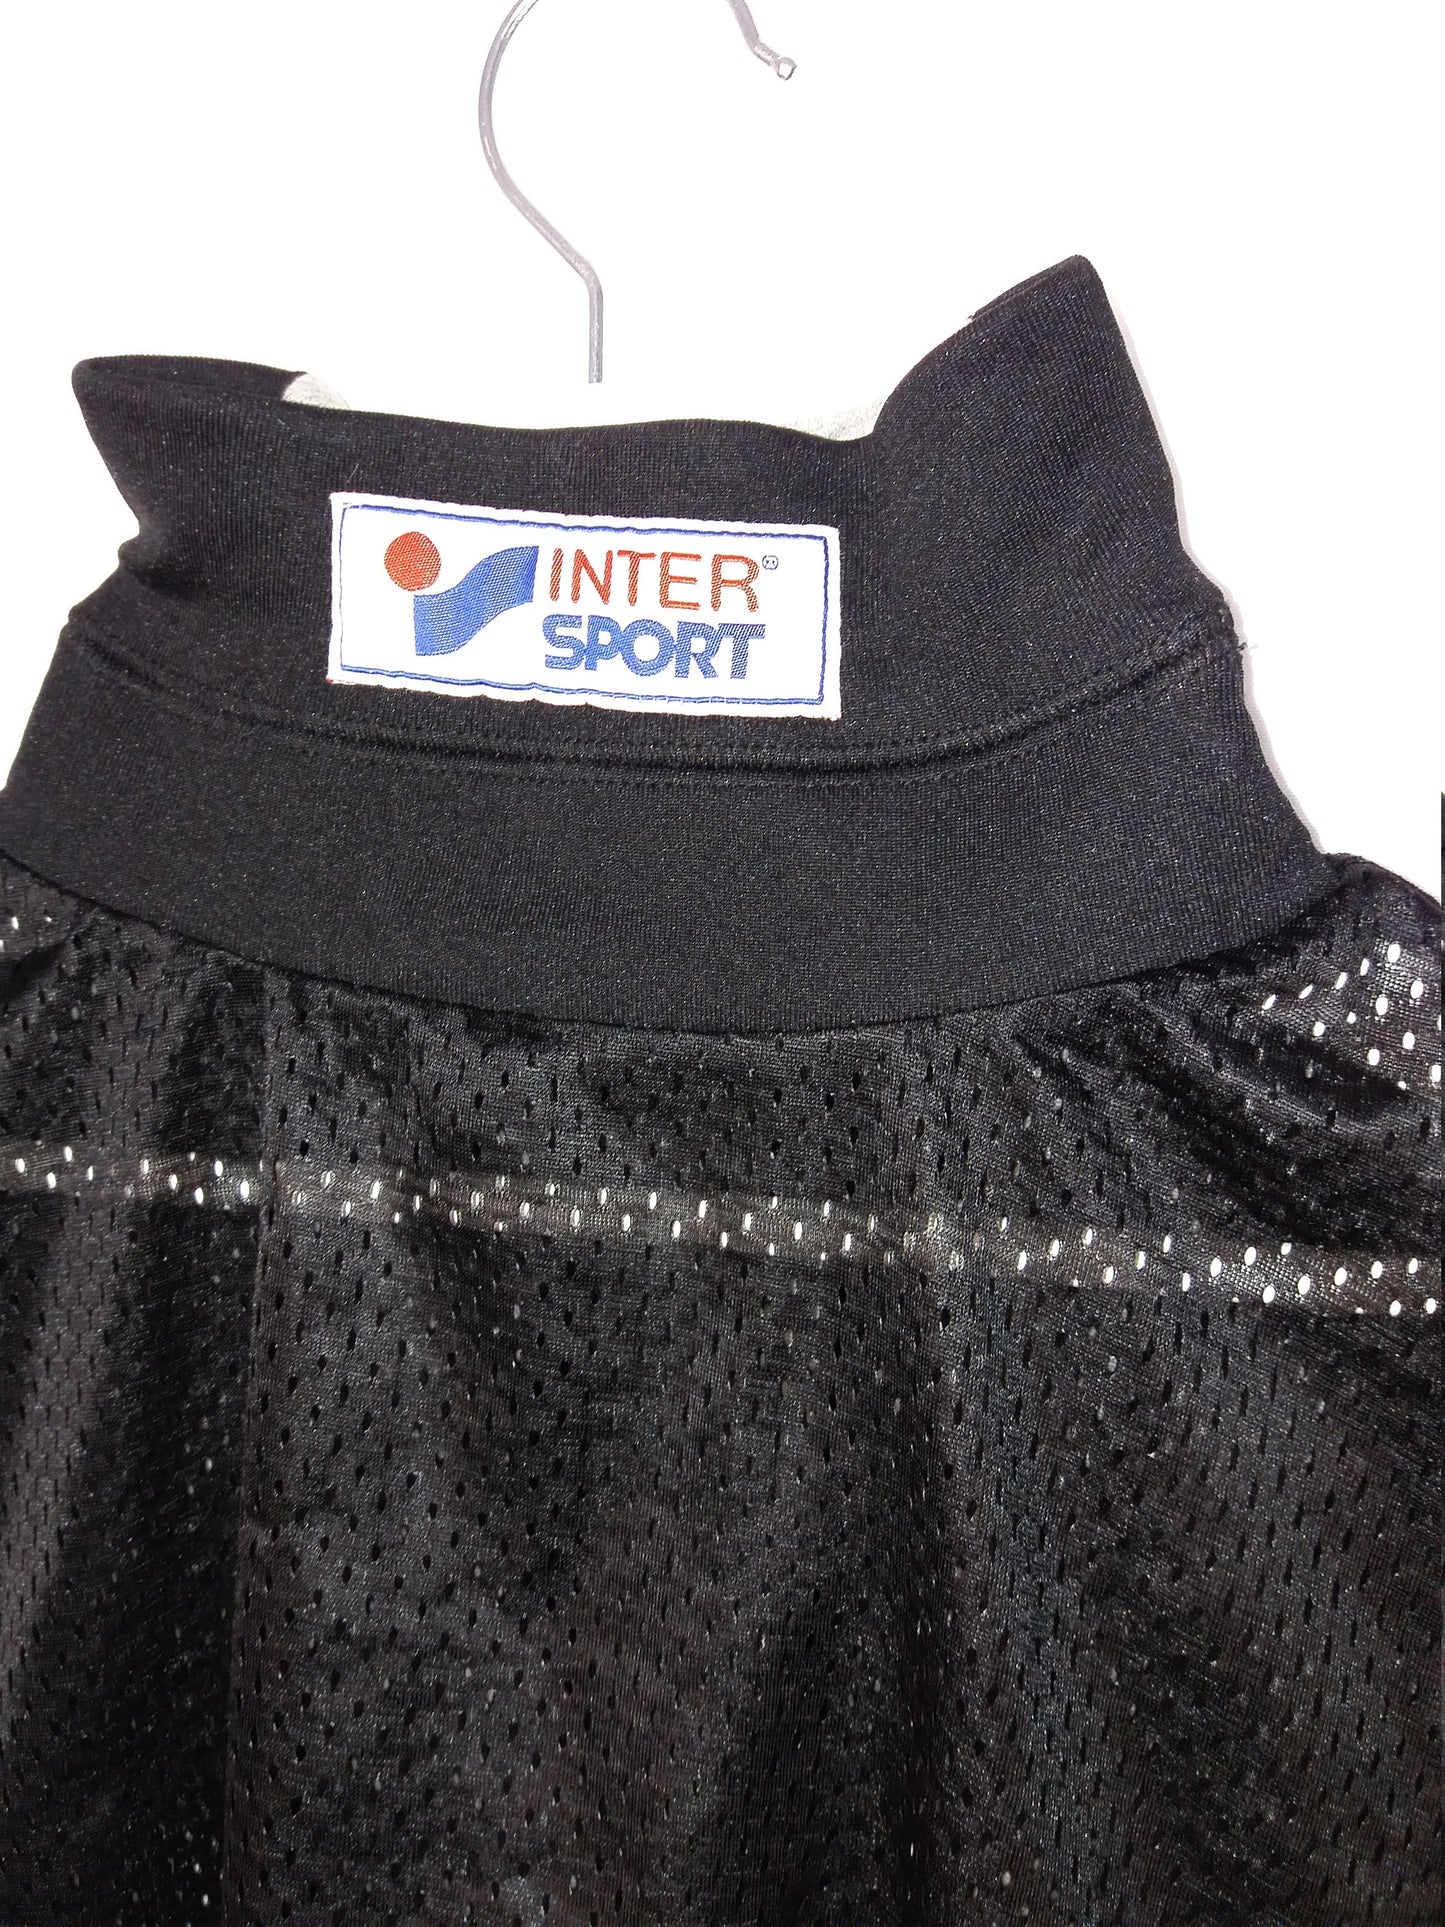 INTERSPORT Boxing Sports Mesh Crop Top - size XS-S